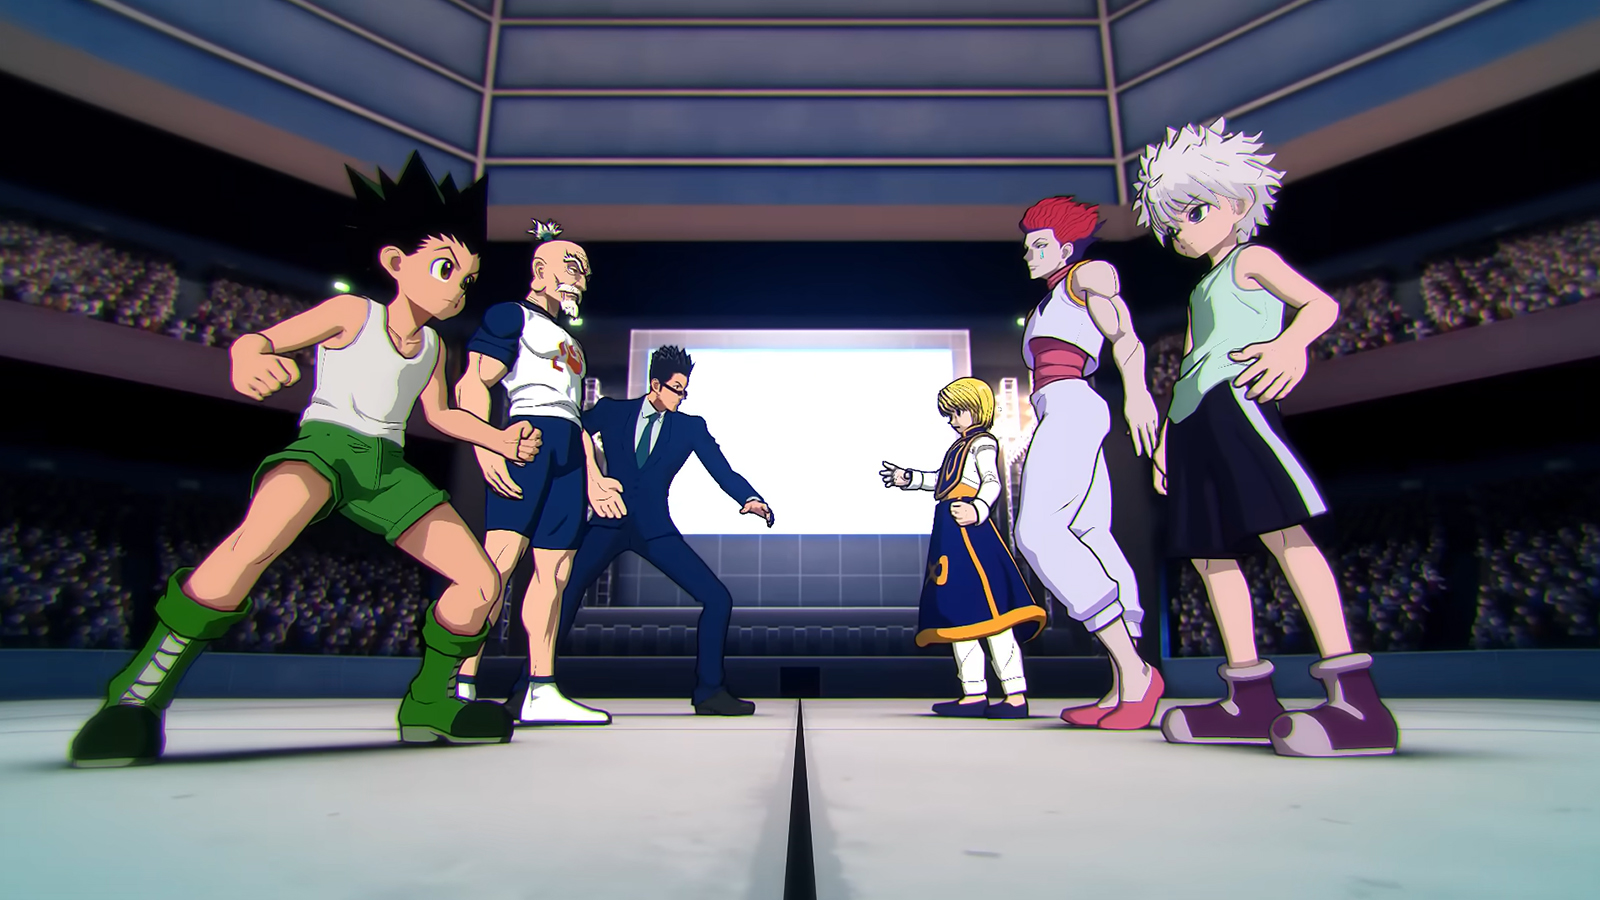 All Nen x Impact characters in Hunter x Hunter fighting game